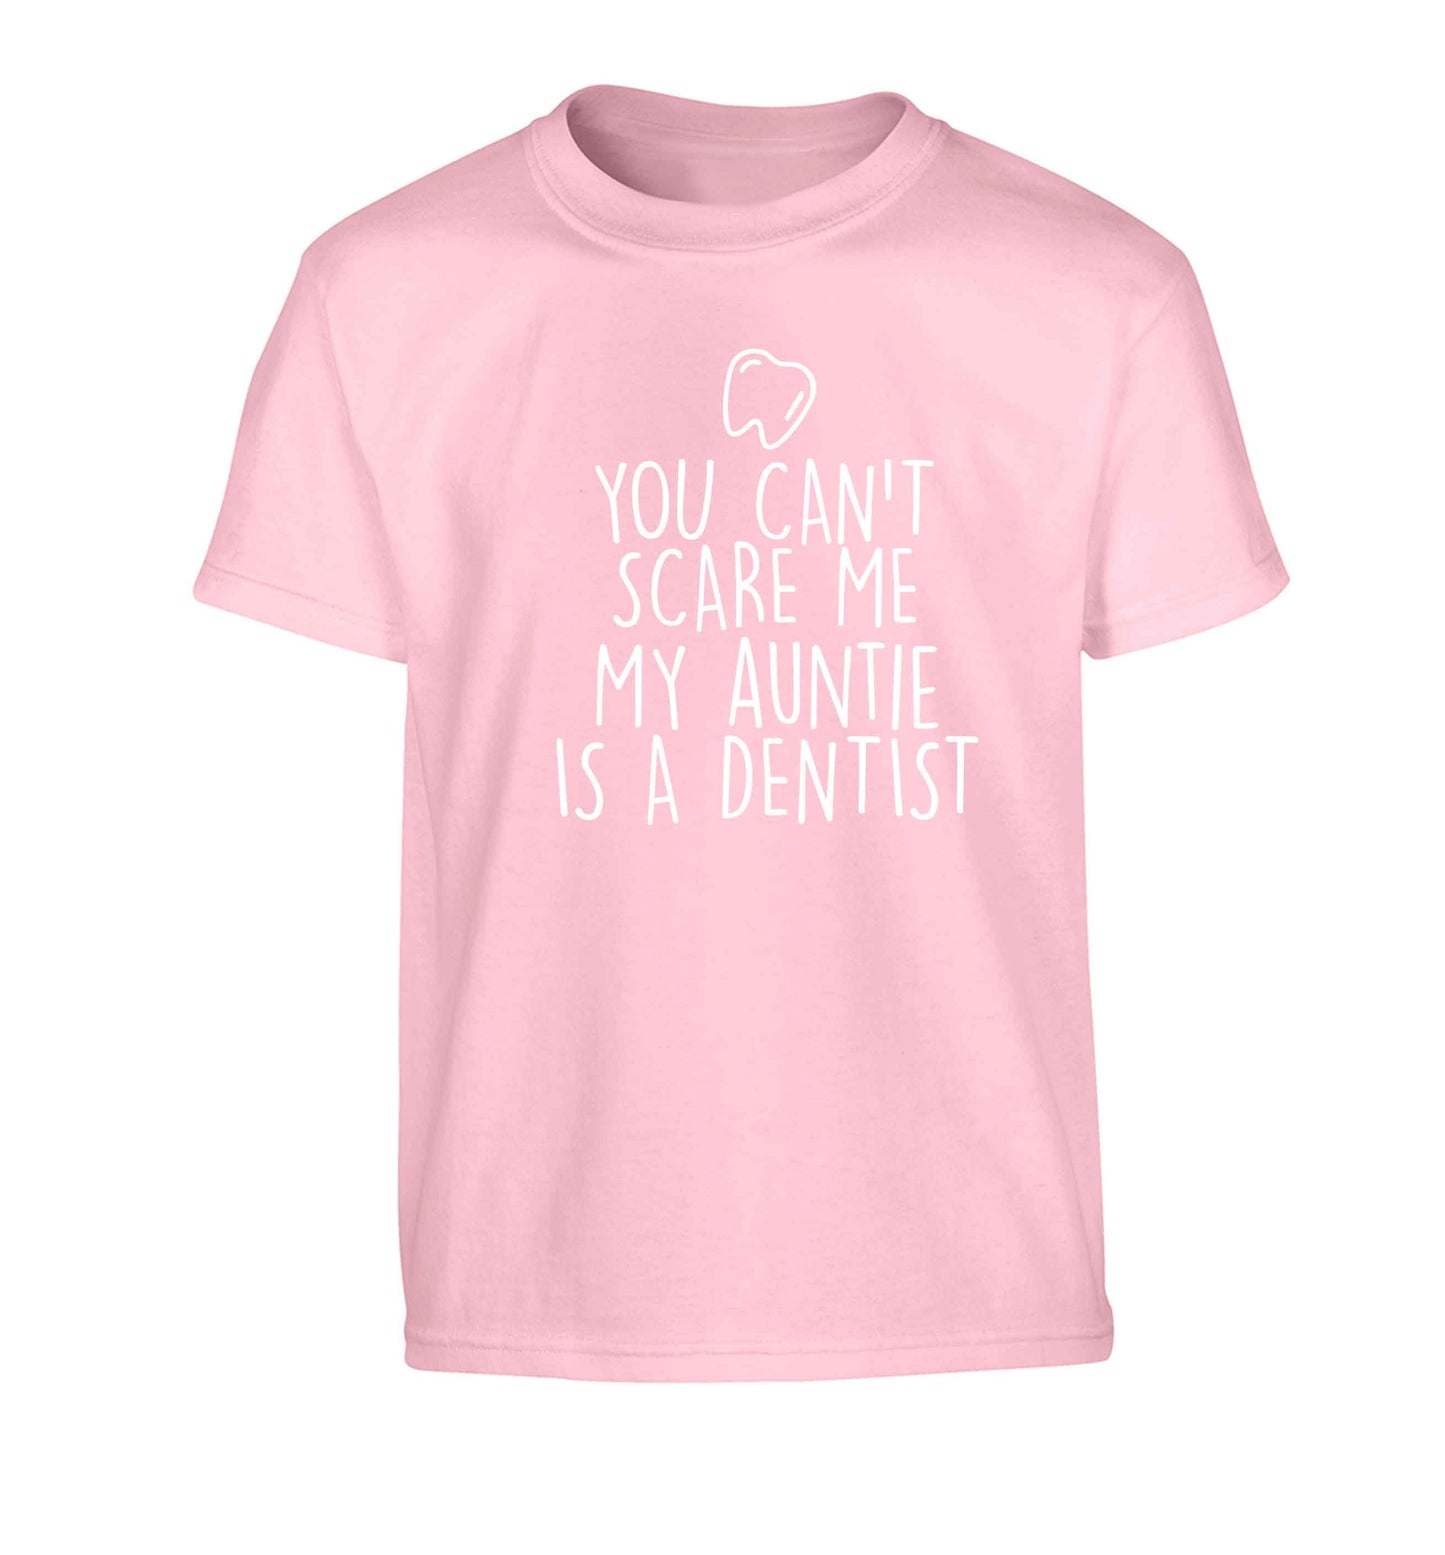 You can't scare me my auntie is a dentist Children's light pink Tshirt 12-13 Years